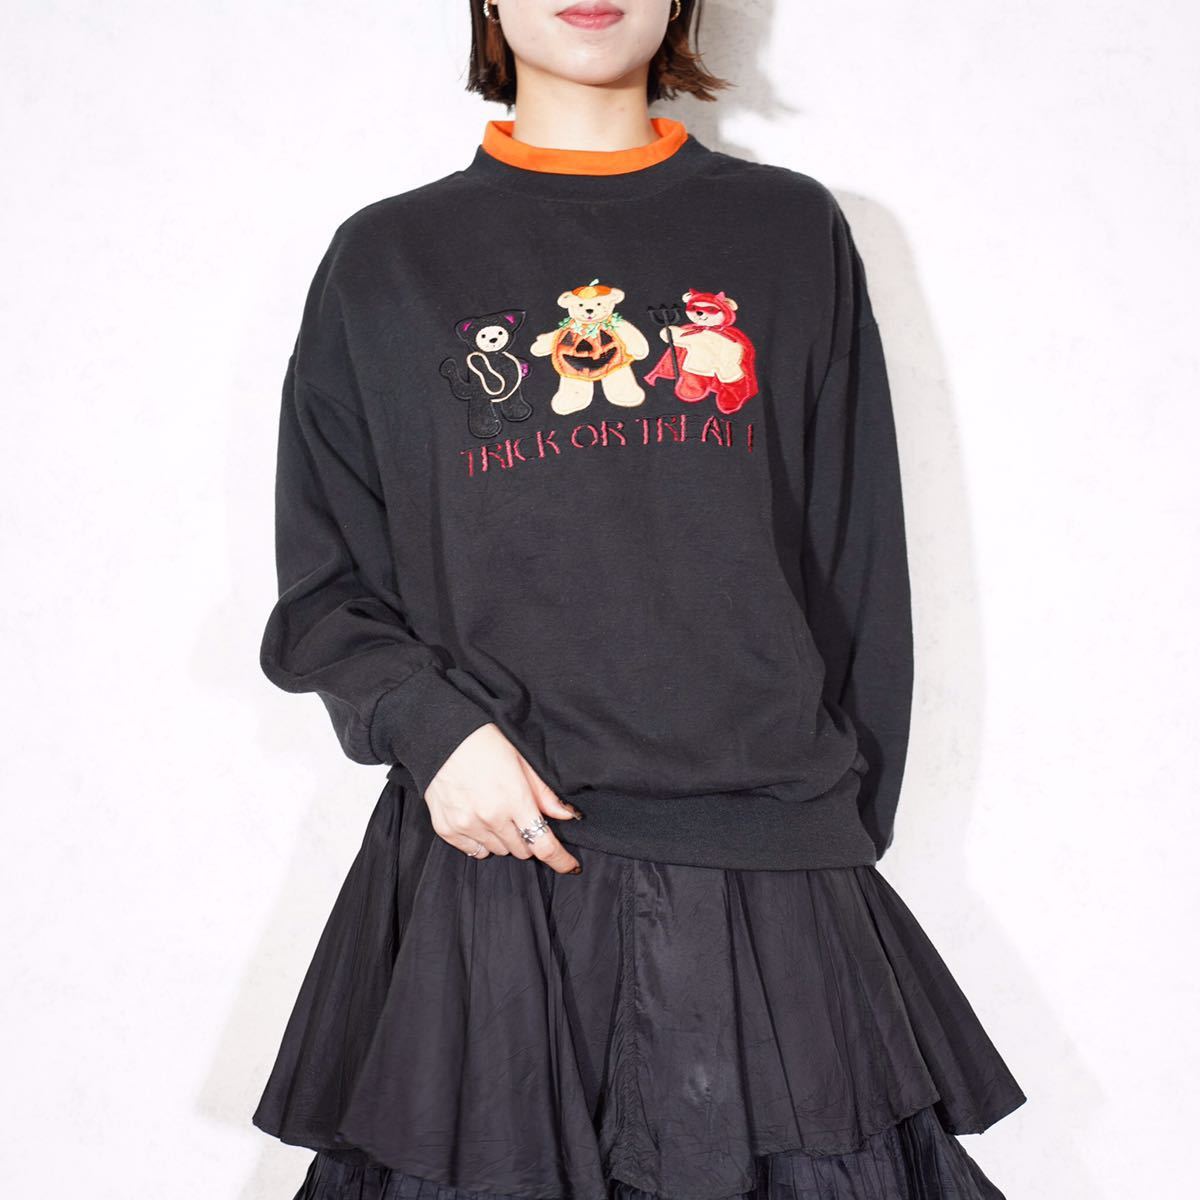 USA VINTAGE BASIC EDITIONS BEARS WEAR A COSTUME EMBROIDERY DESIGN SWEAT SHIRT/アメリカ古着仮装したくま刺繍デザインスウェット